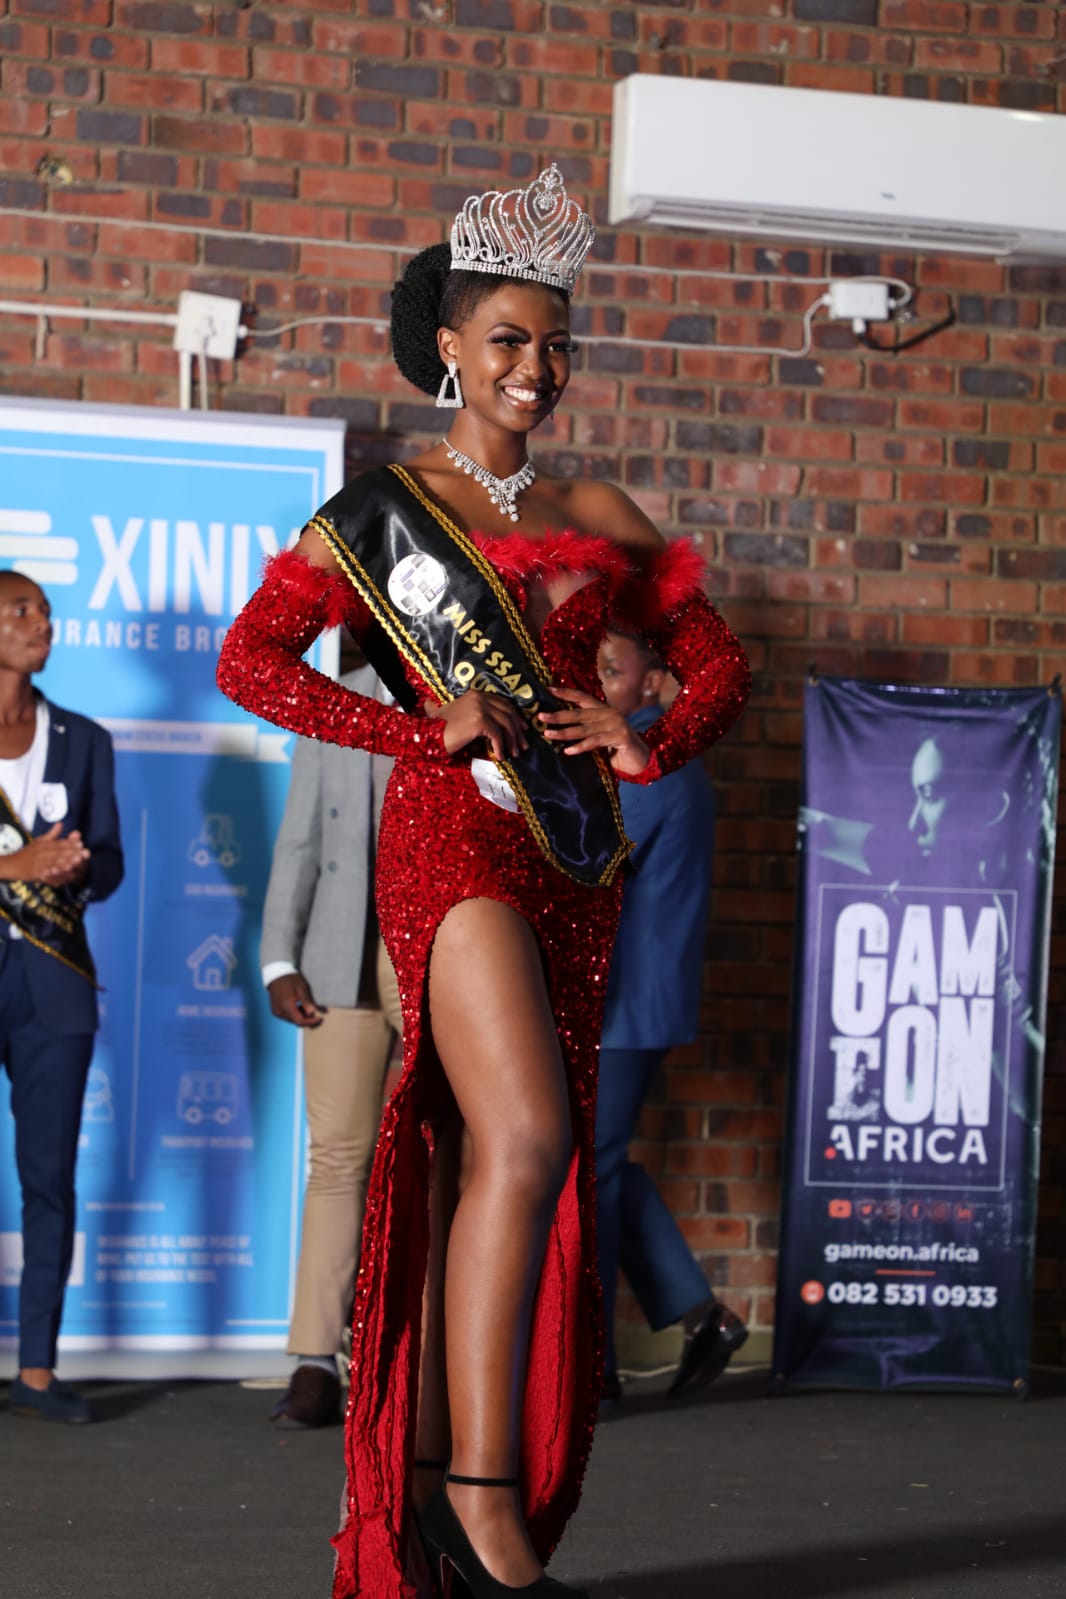 From owning modeling academy, to infectious beauty that crowned her Miss Siphosethu Arts Project Queen